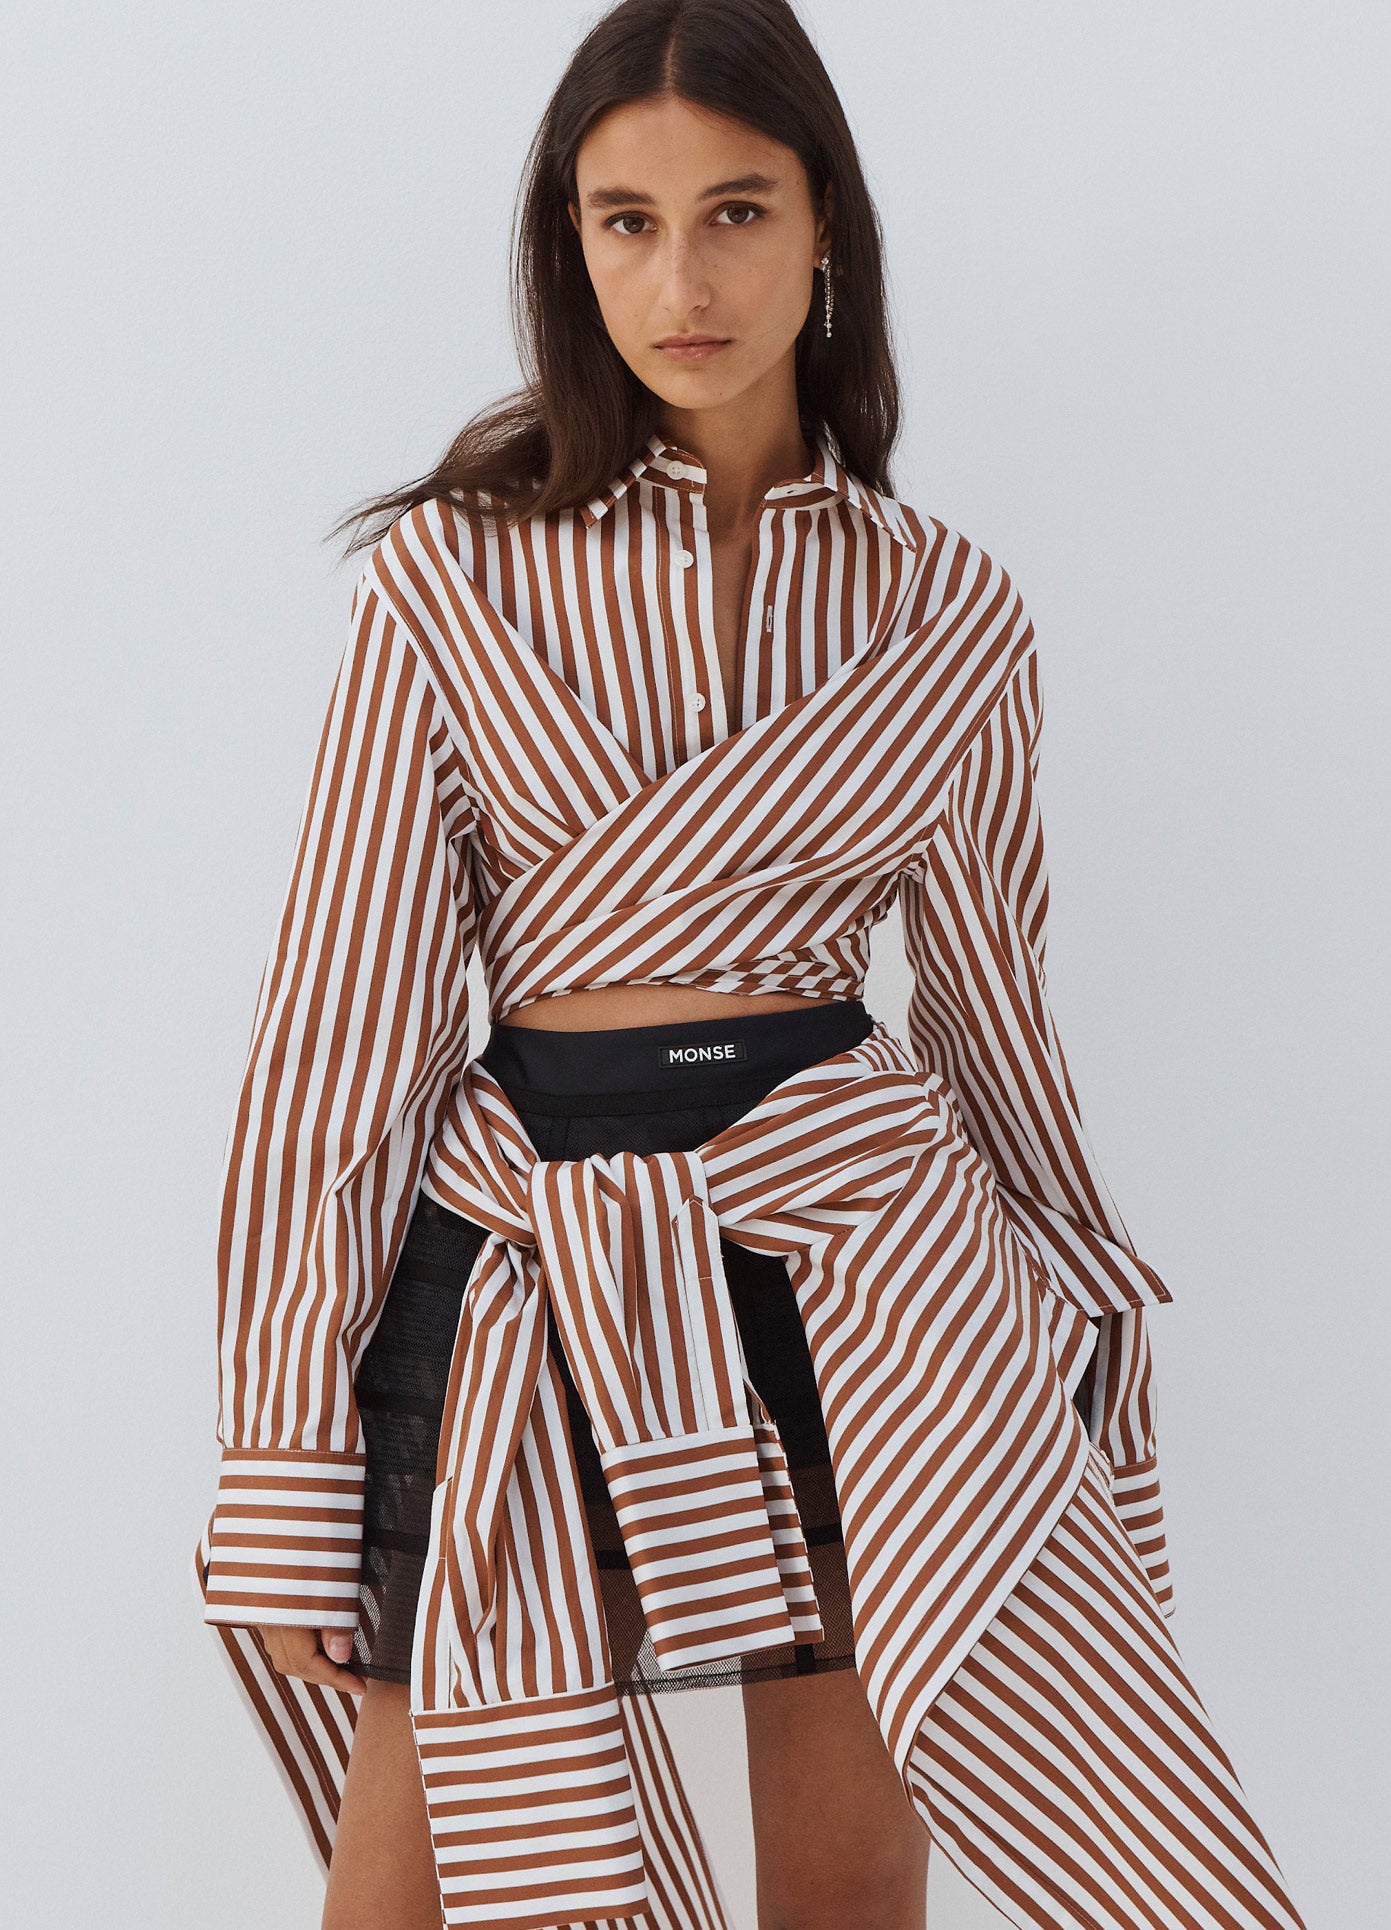 MONSE Striped Long Sleeve Shirt in Brown and Ivory on Model Front View